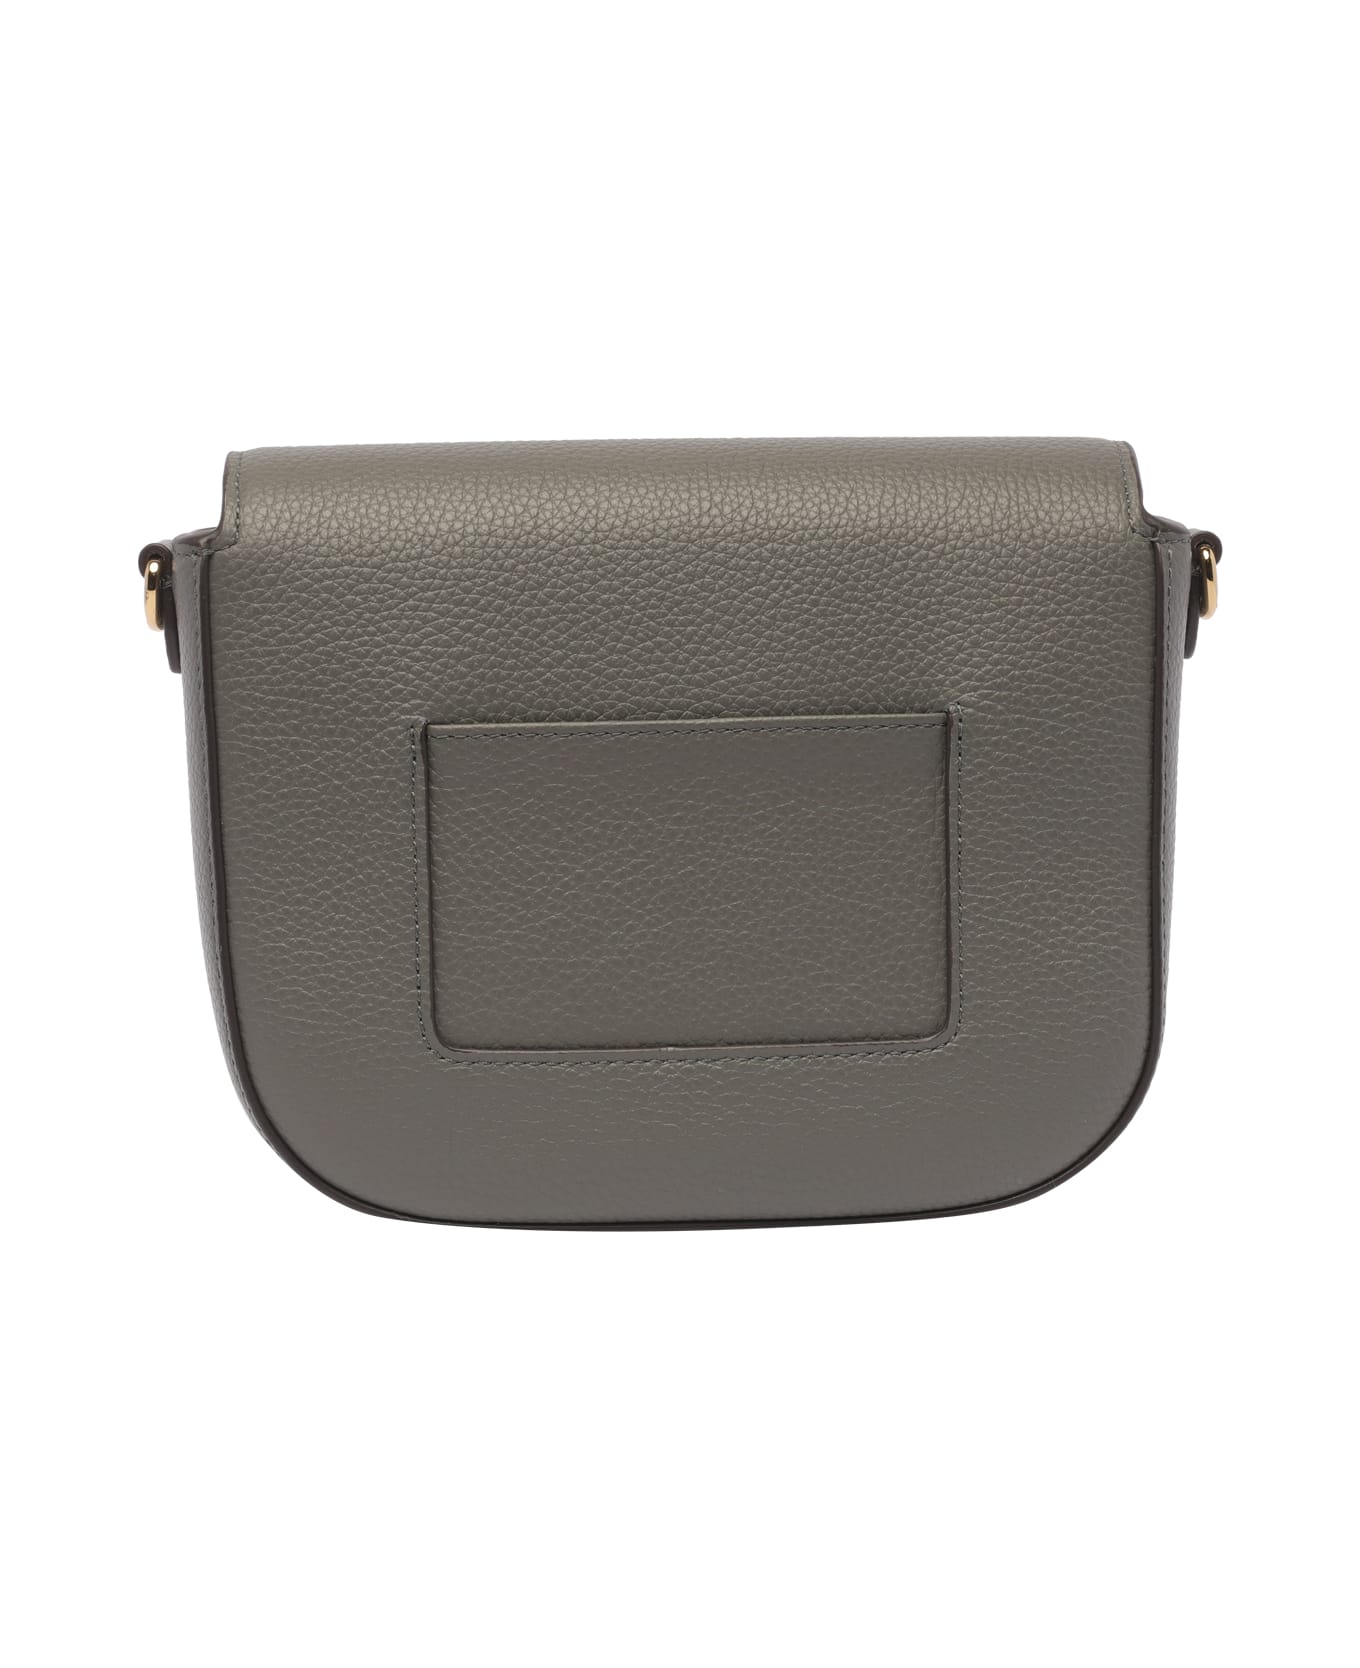 Mulberry Small Darley Satchel Classic Bag - Grey トートバッグ